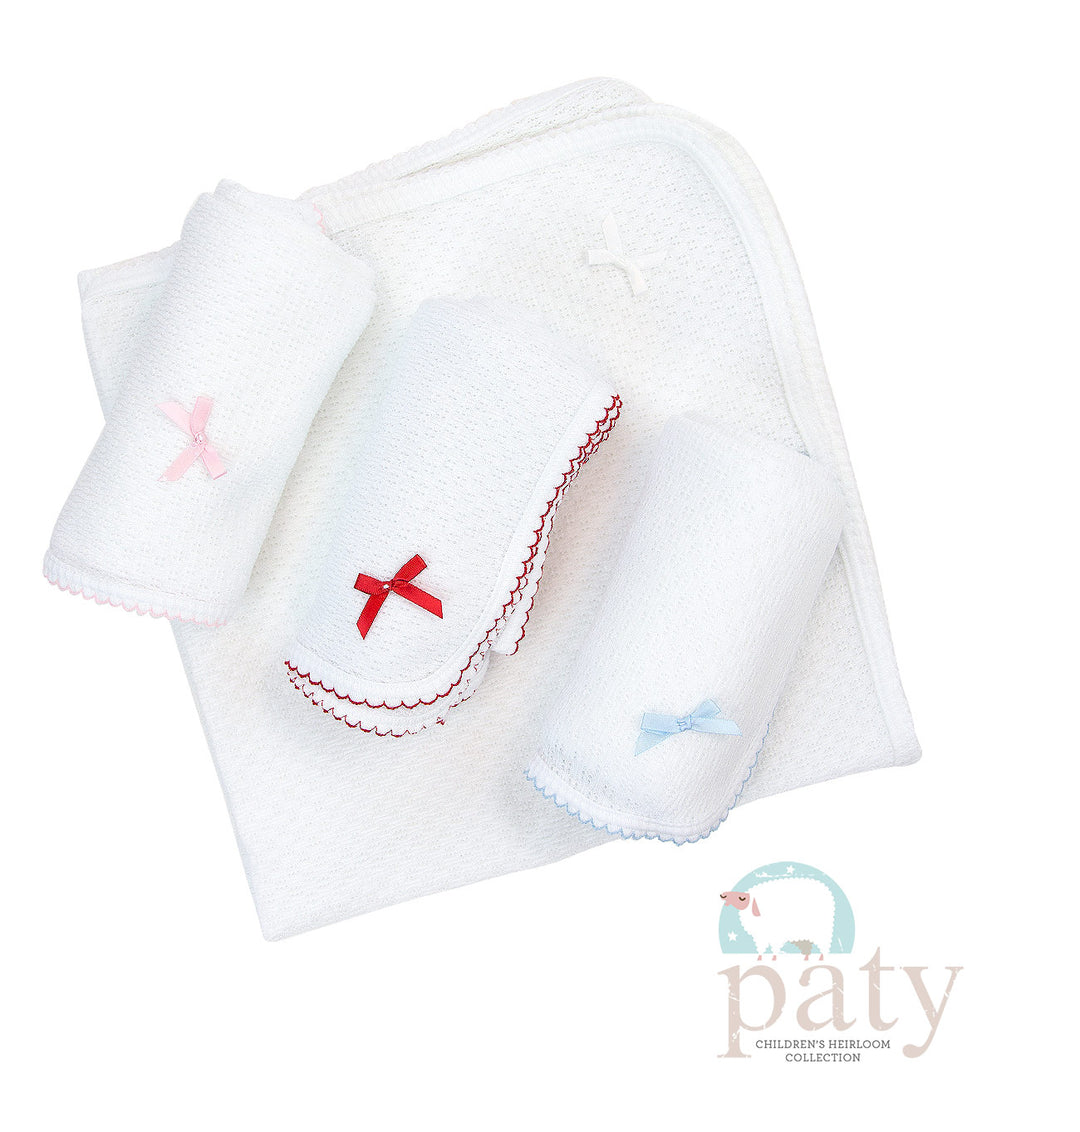 Paty Receiving Blanket - White/Blue